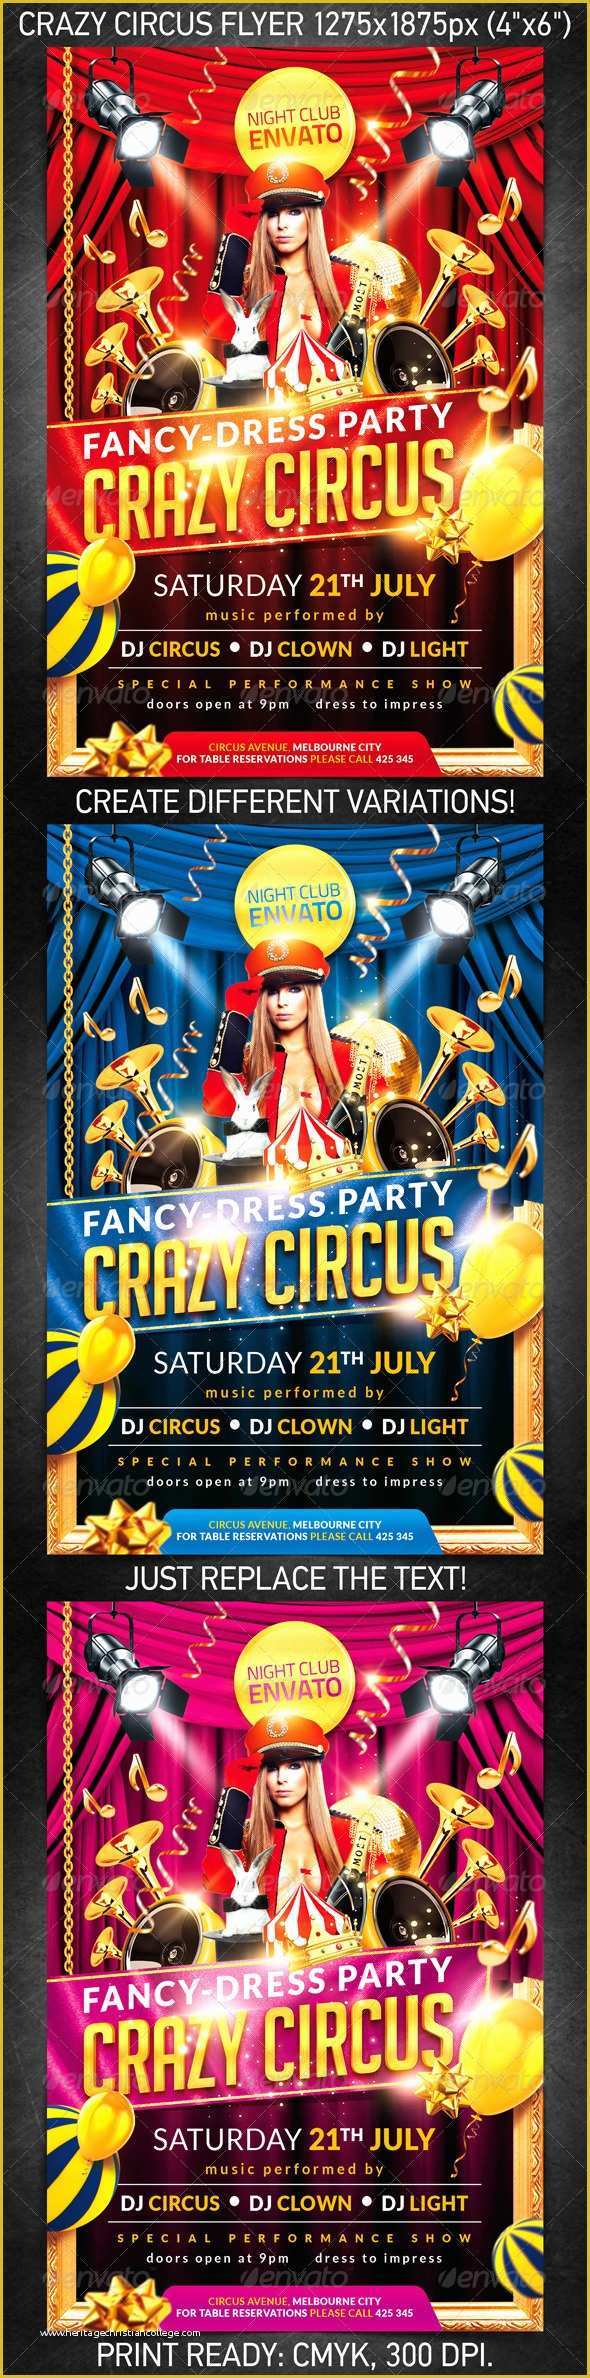 Circus Poster Template Free Download Of Crazy Circus Party Flyer Psd Template On Behance